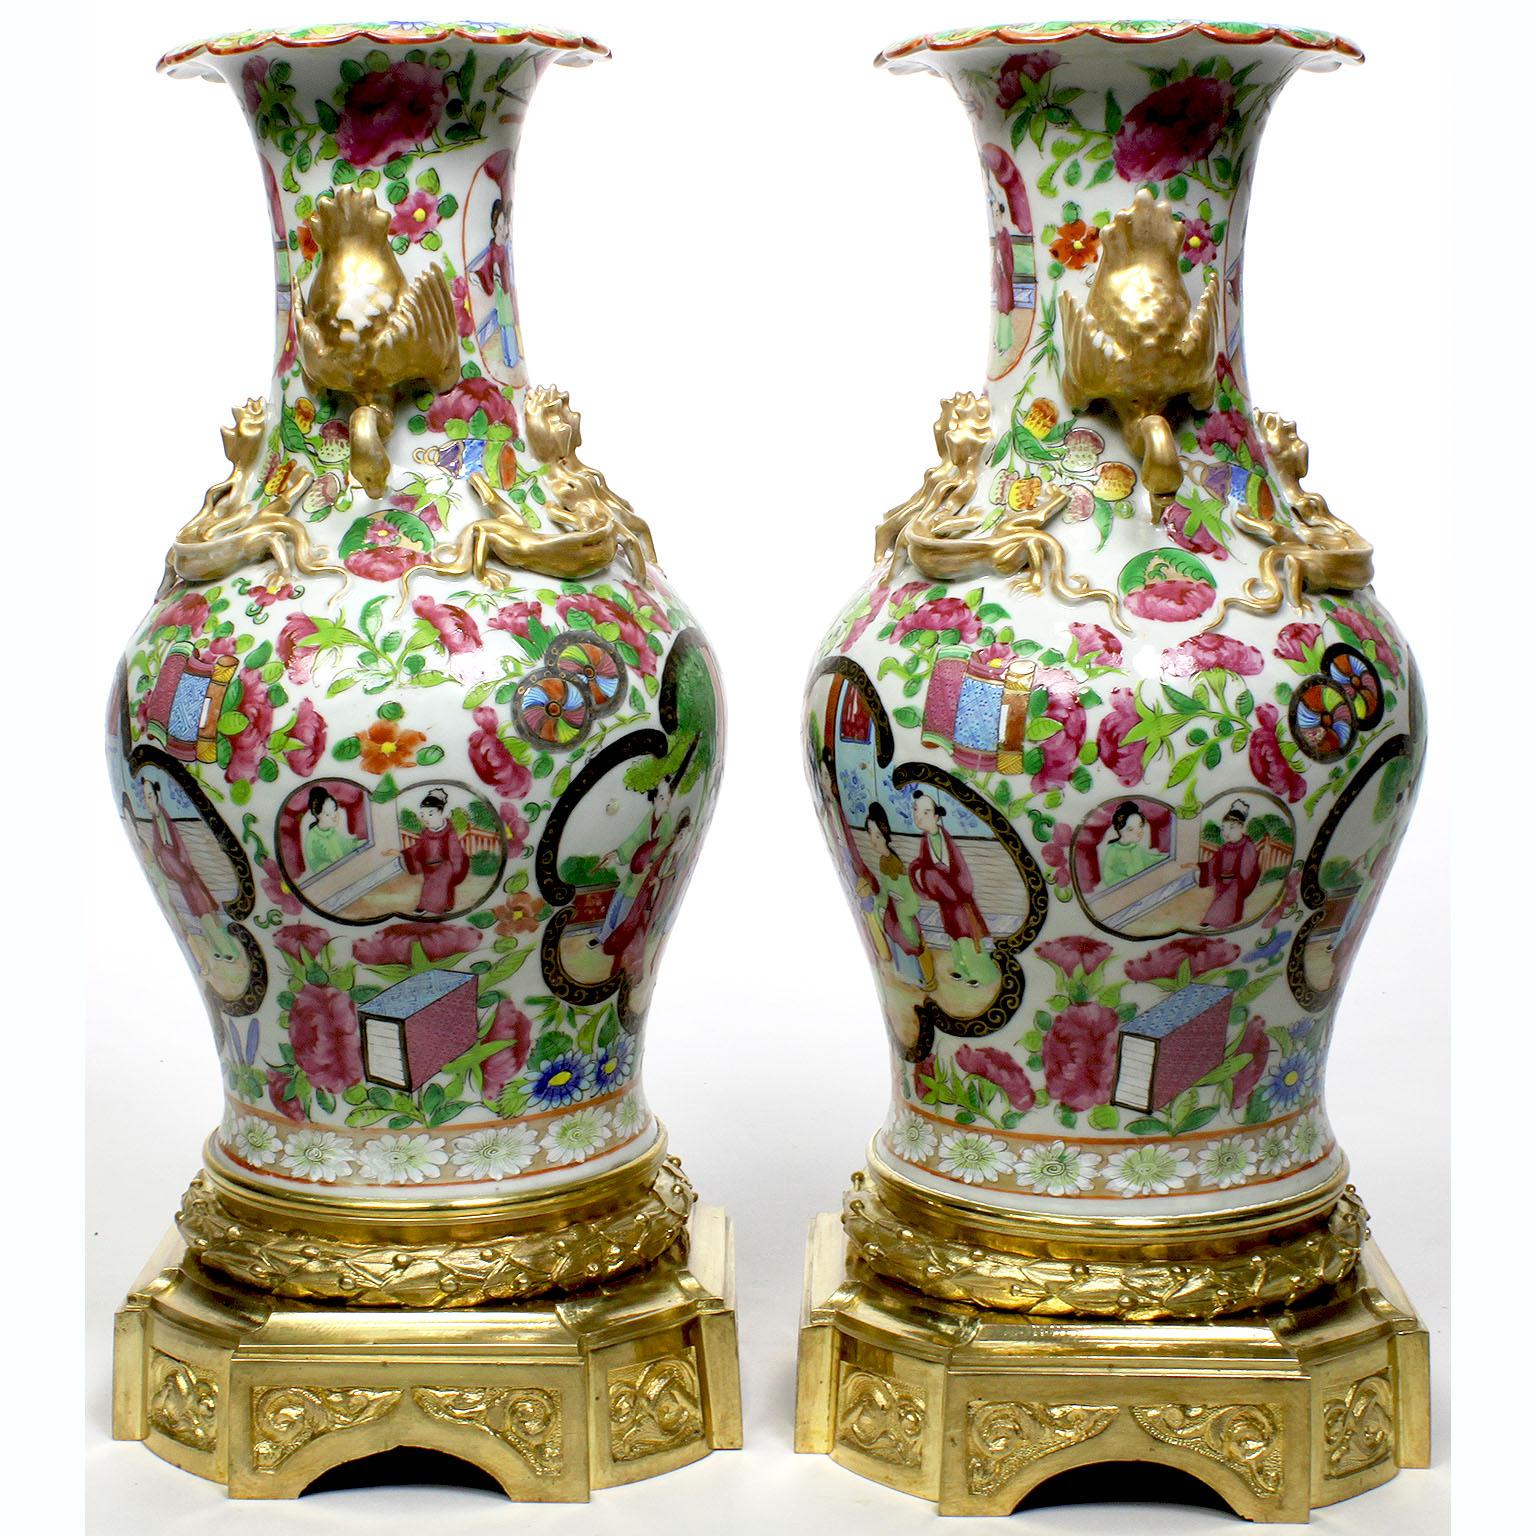 A fine pair of Louis XVI style chinoiserie gilt-bronze mounted Chinese export famille rose porcelain vases. The ovoid hand painted porcelain body with dual scenes of a sword presentation to the Royal Court, with stylized gilt dragon porcelain mounts